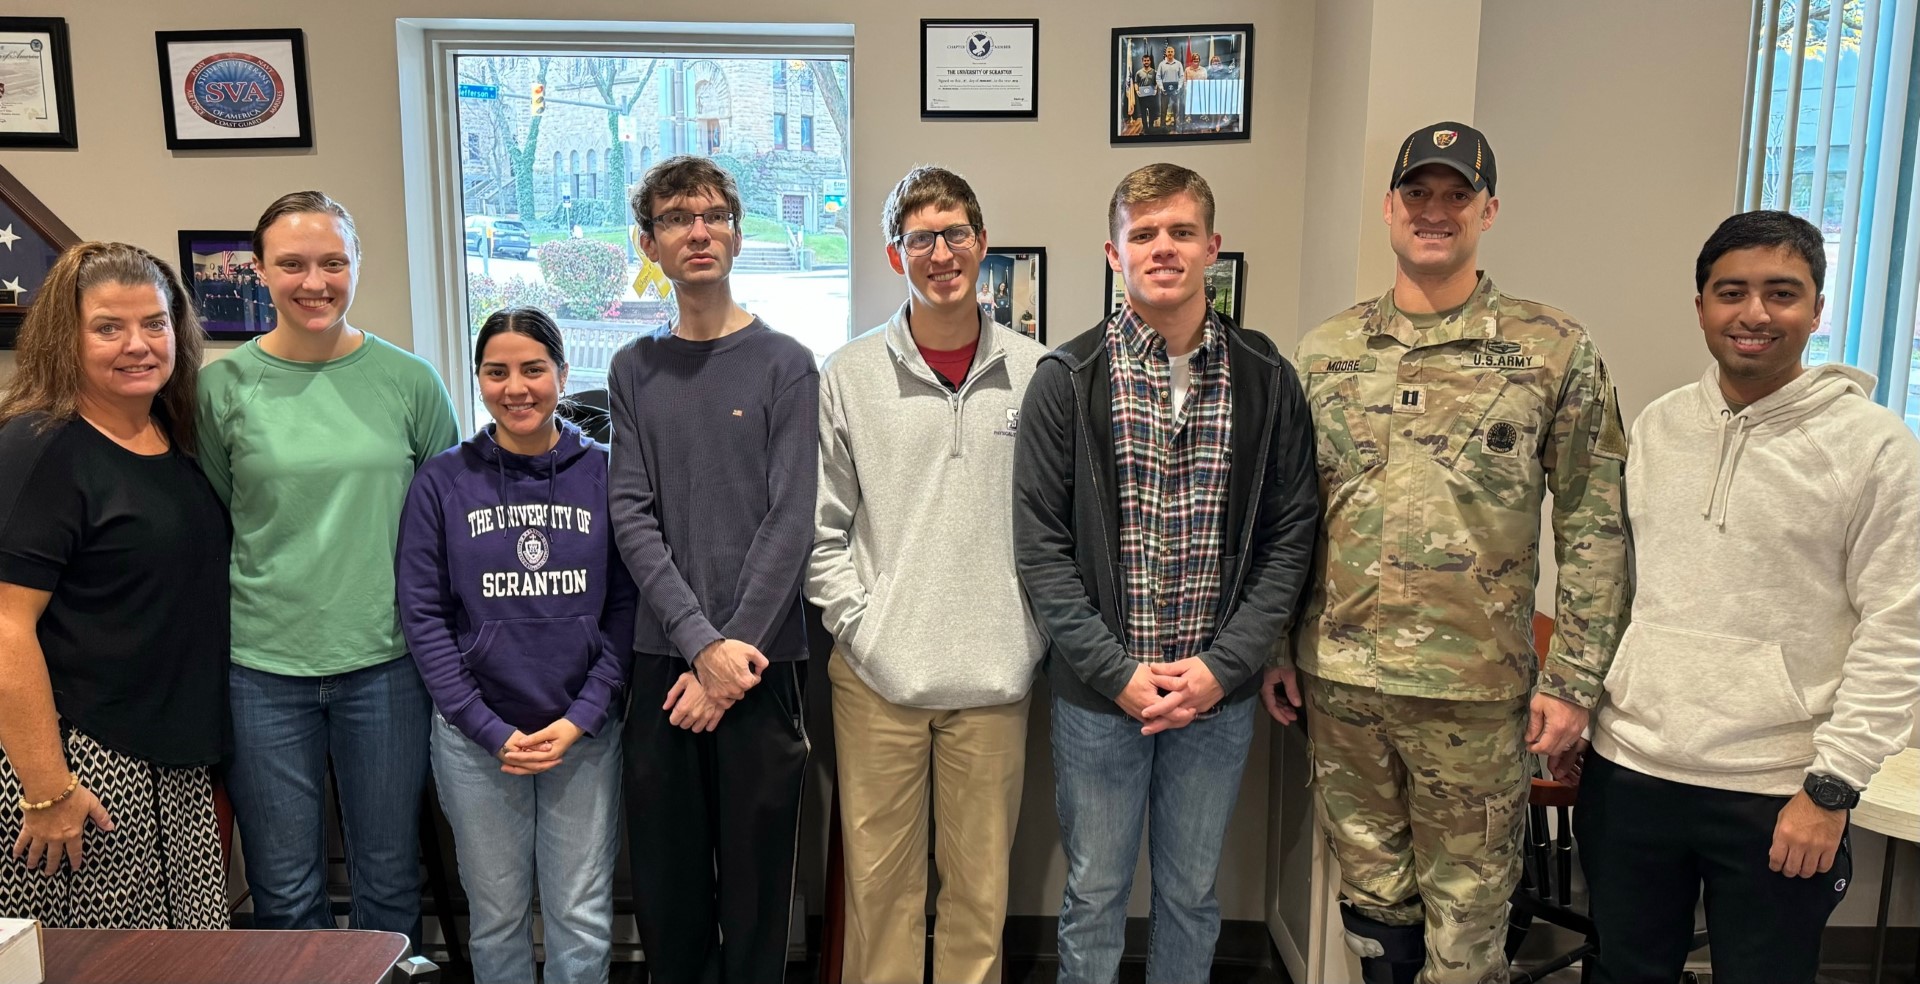 Members of the Student Veterans Organization, shown, and the Tactical Fitness Club, are uniting to support veterans this fall. Shown, from left: Student Veterans Organization Advisor Barbara King with SVO members at their most recent meeting: Brianna Cahoon, Claudia Lopez, Ben DeTrempe, Ryan Lally, Josh Moore and Jay Kapadia.